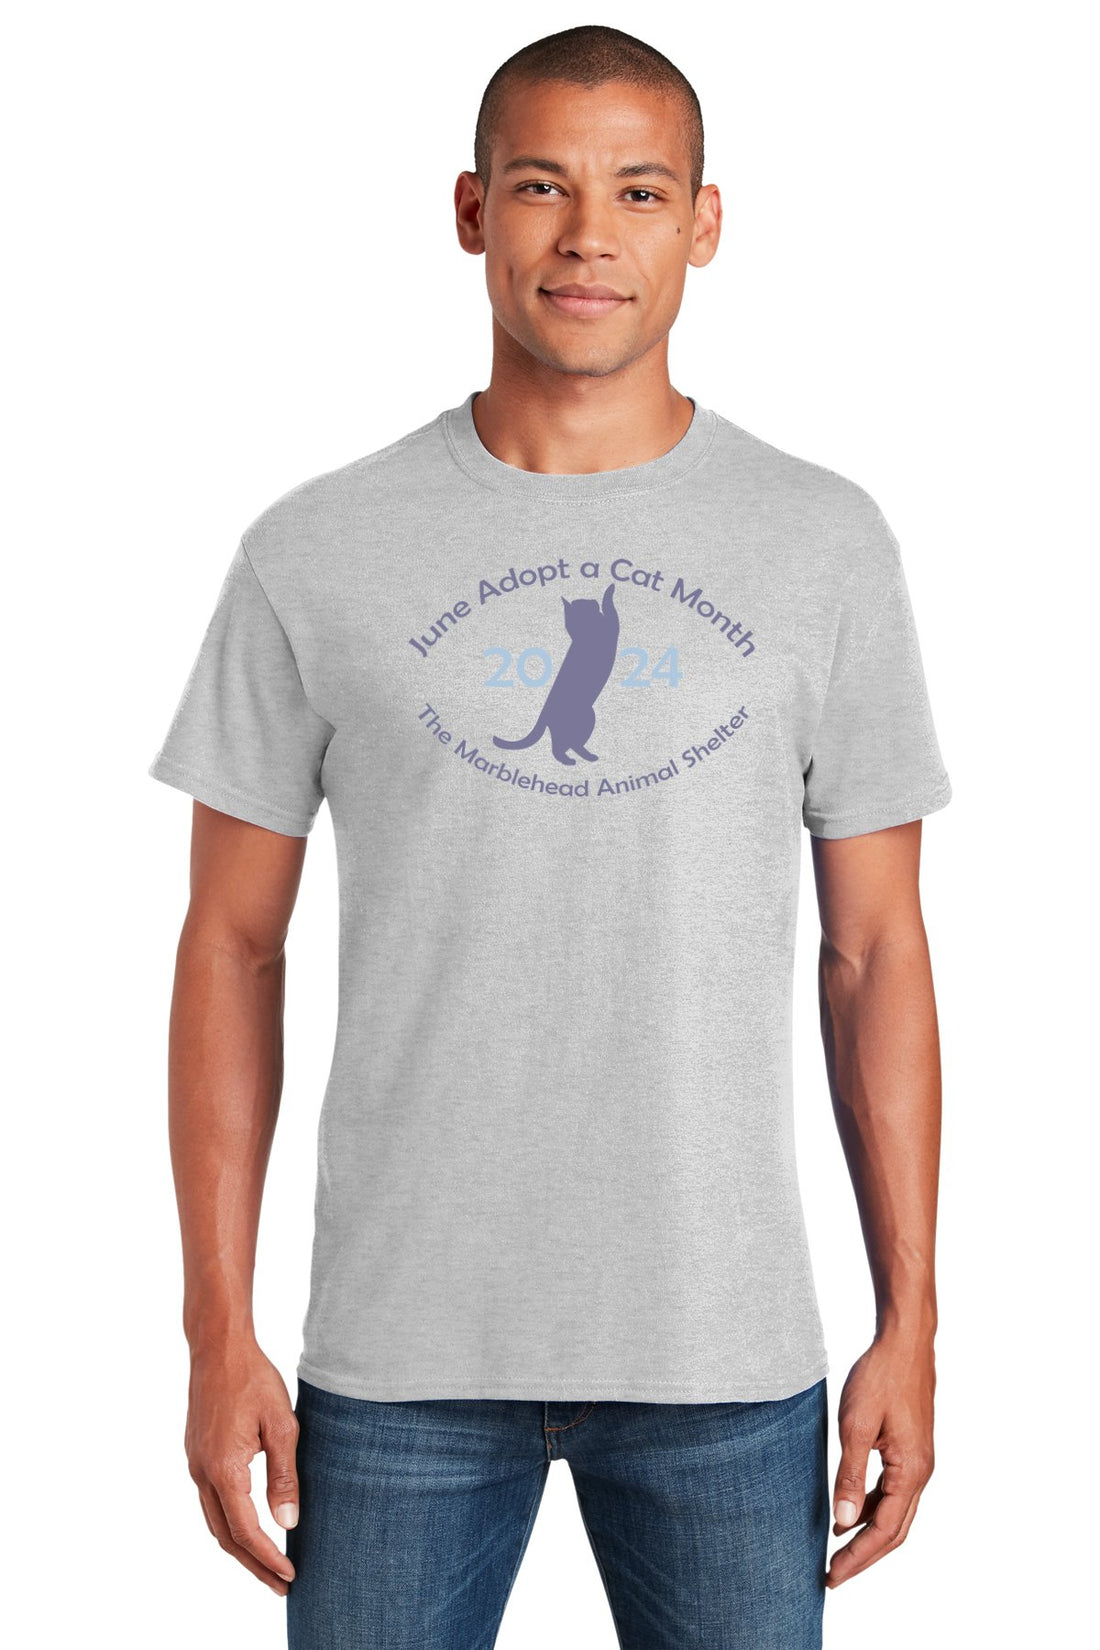 Animal Shelter Adopt-A-Cat Month Unisex Relaxed Tee